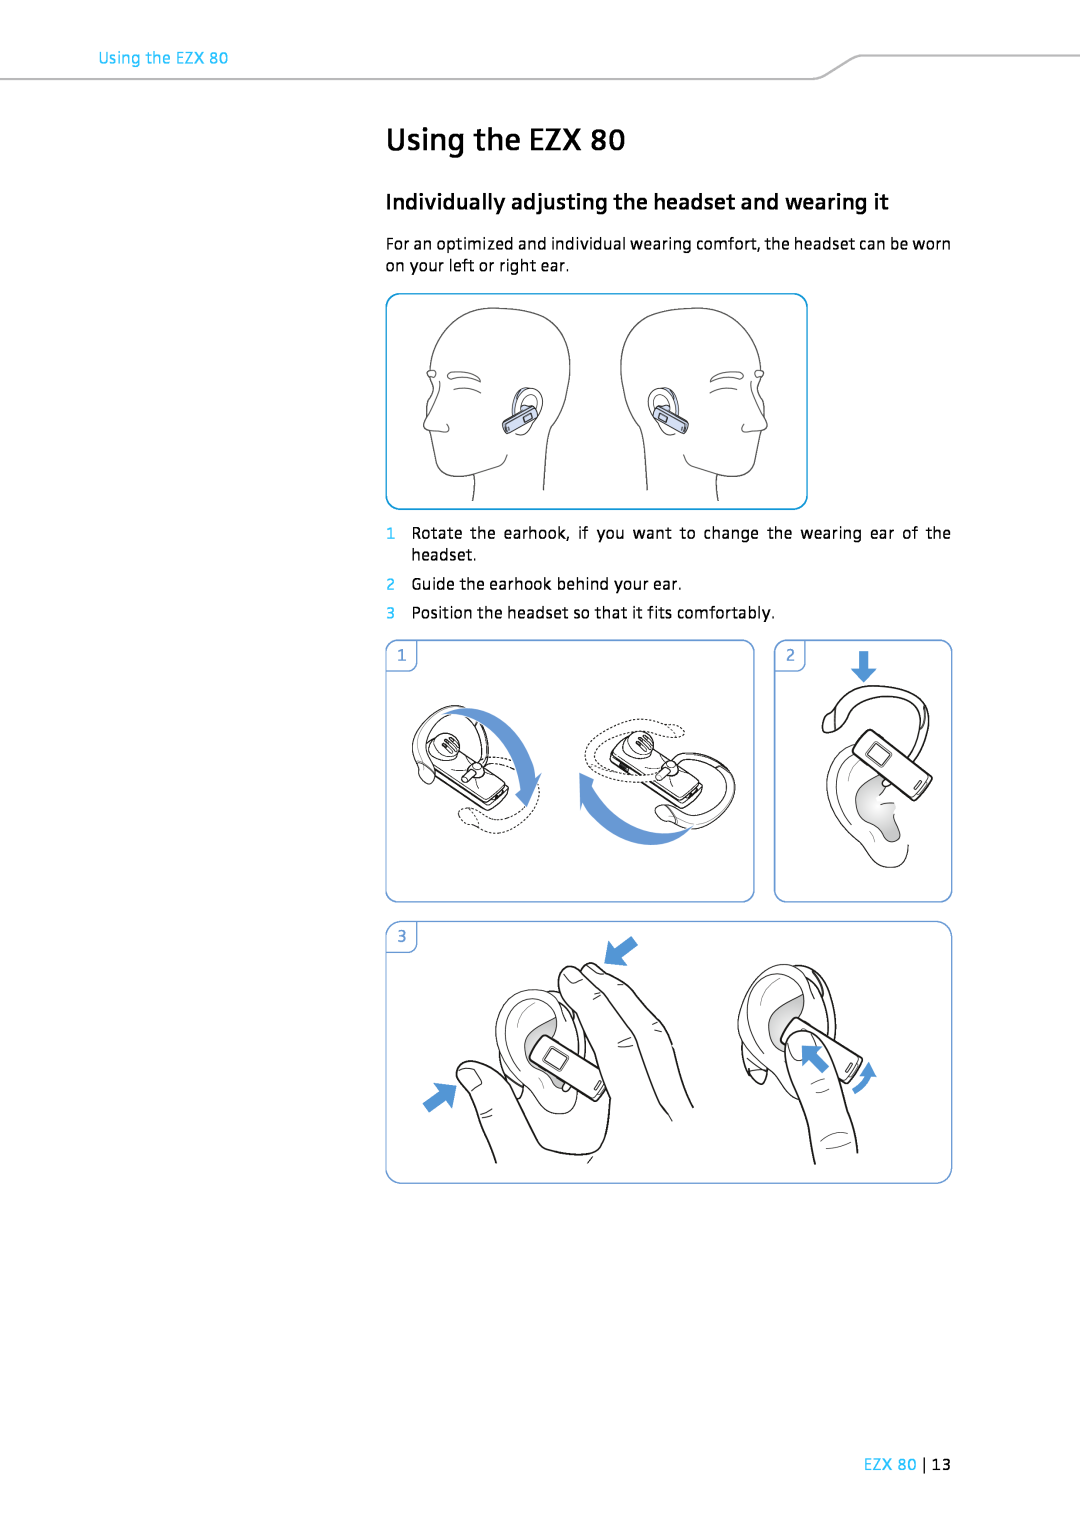 Sennheiser EZX 80 instruction manual Using the EZX, Individually adjusting the headset and wearing it, Ezx 